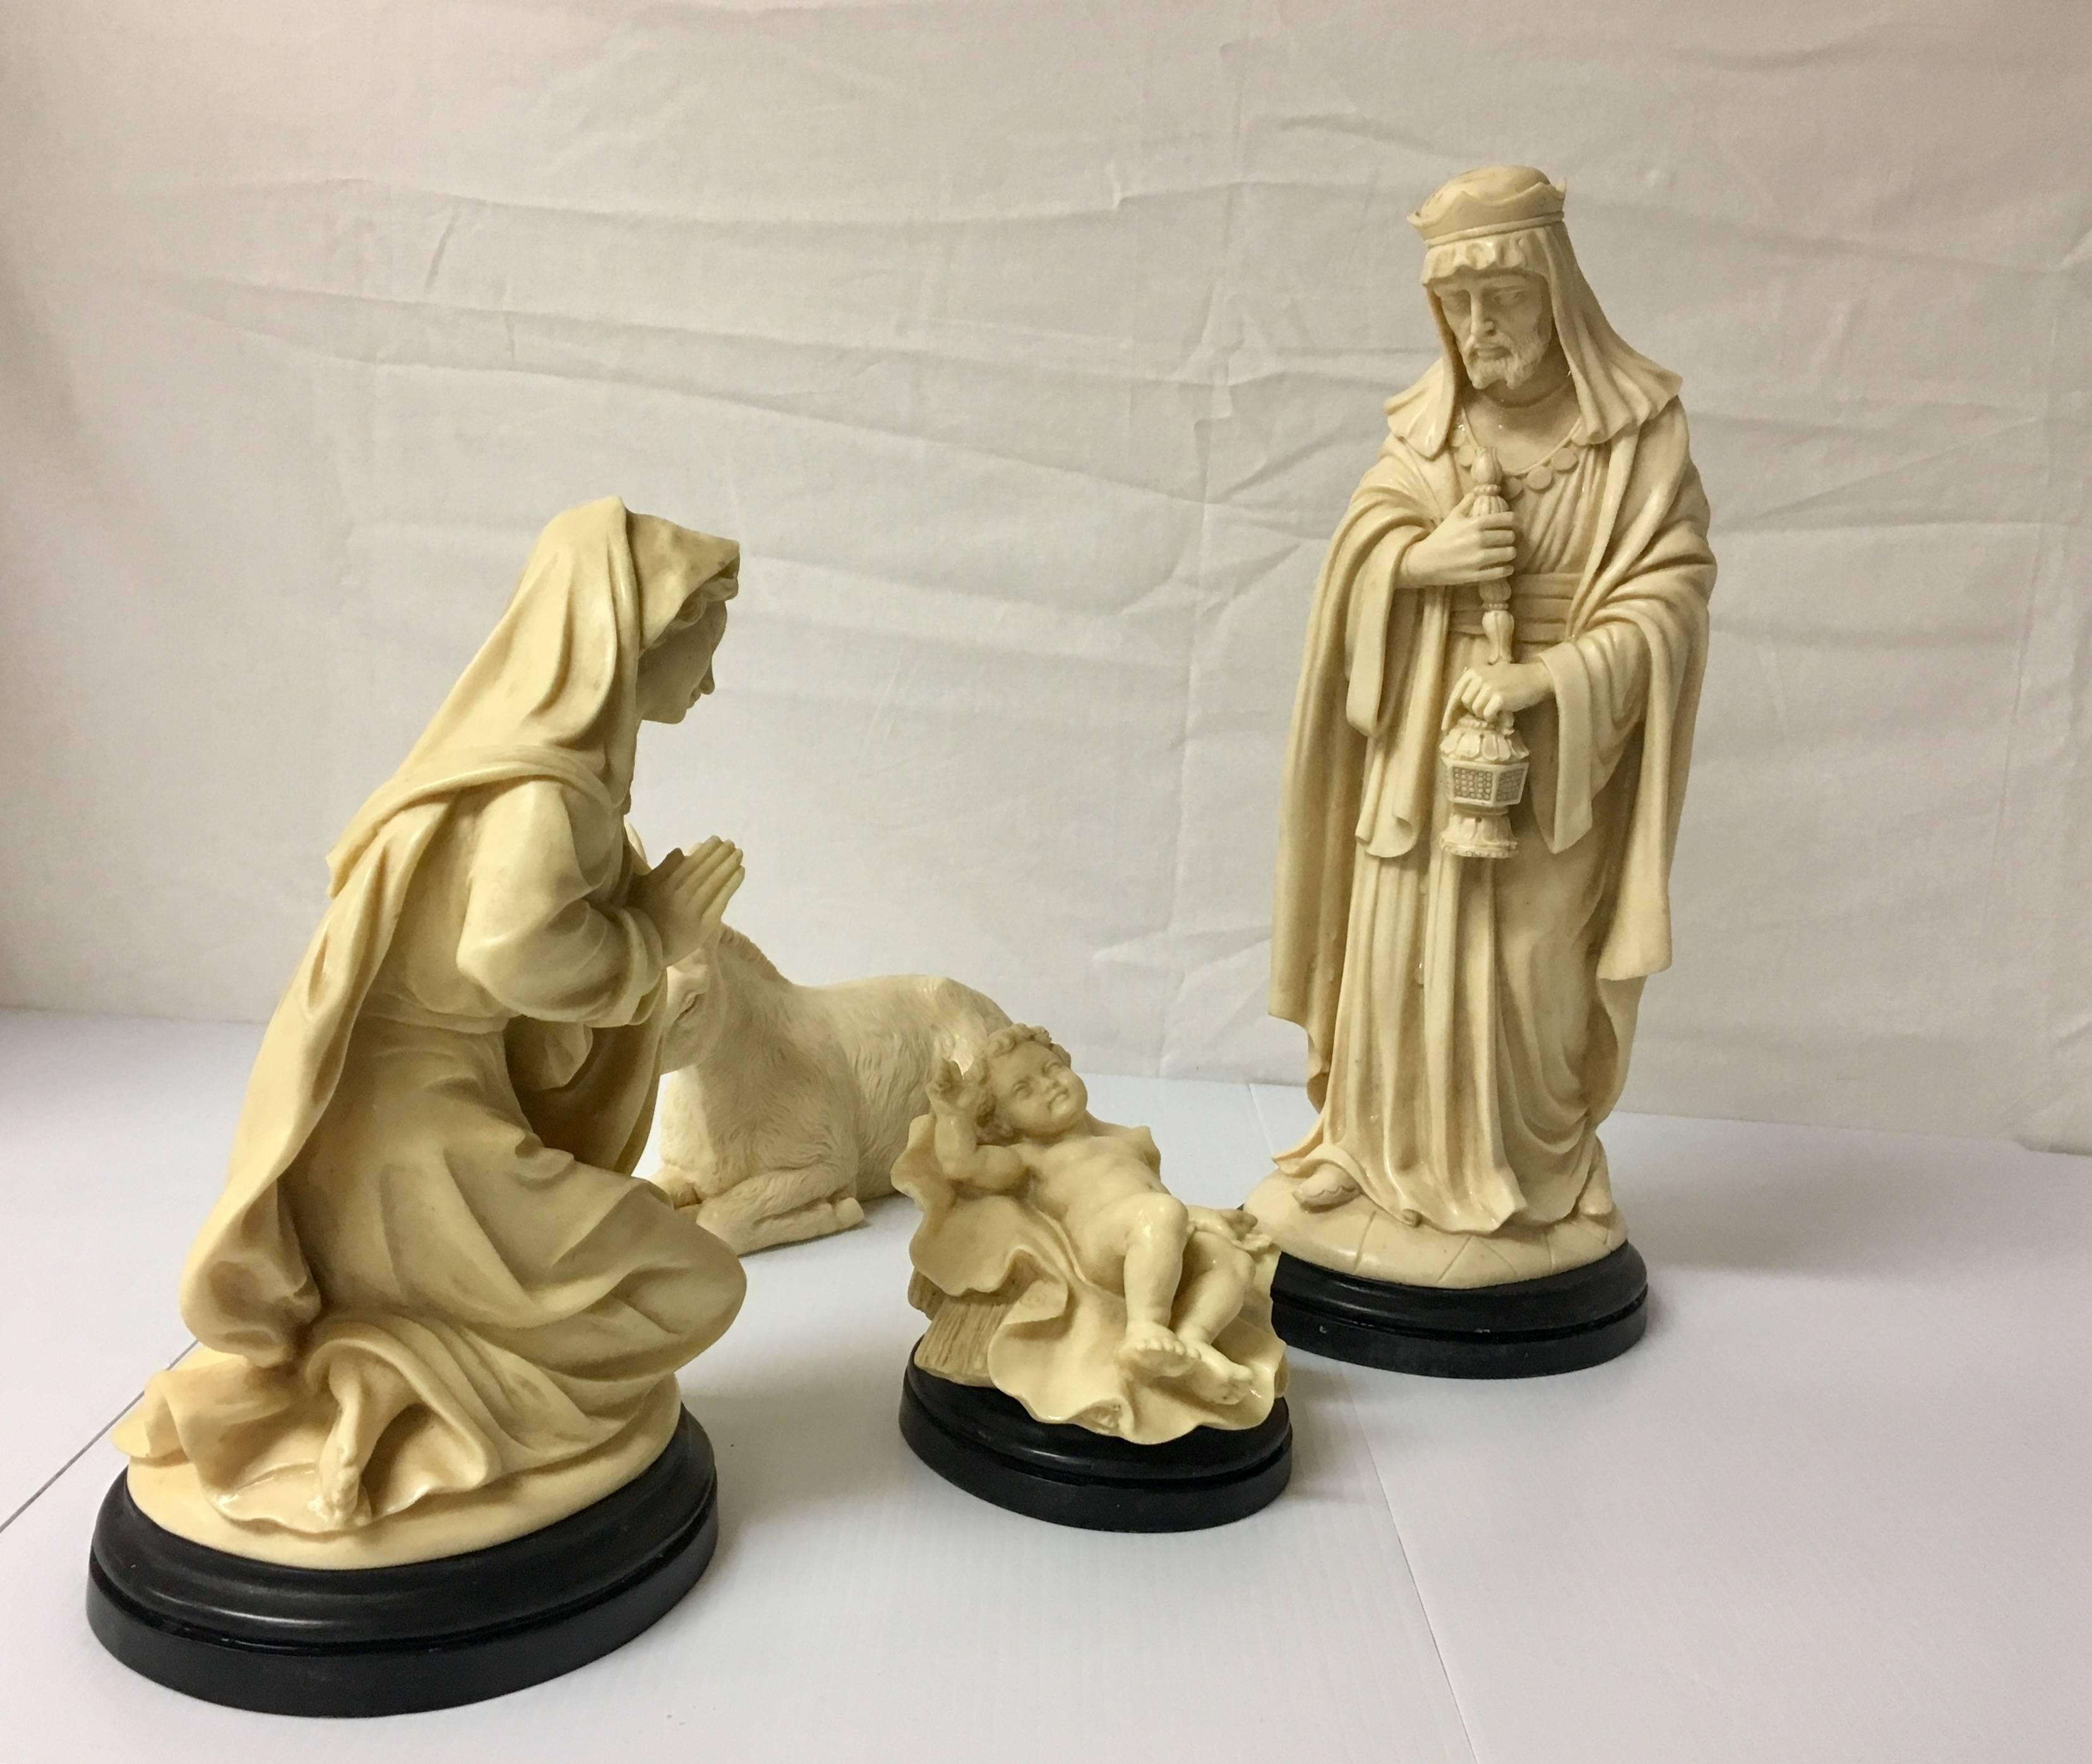 Gorgeous Italian hand-carved, figurative nativity set signed by G. Ruggeri. Each piece is stamped Bianchi and carved from alabaster colored resin with a nice beveled black base. The set comes with 9 figures (pictures show only 8, there is also a